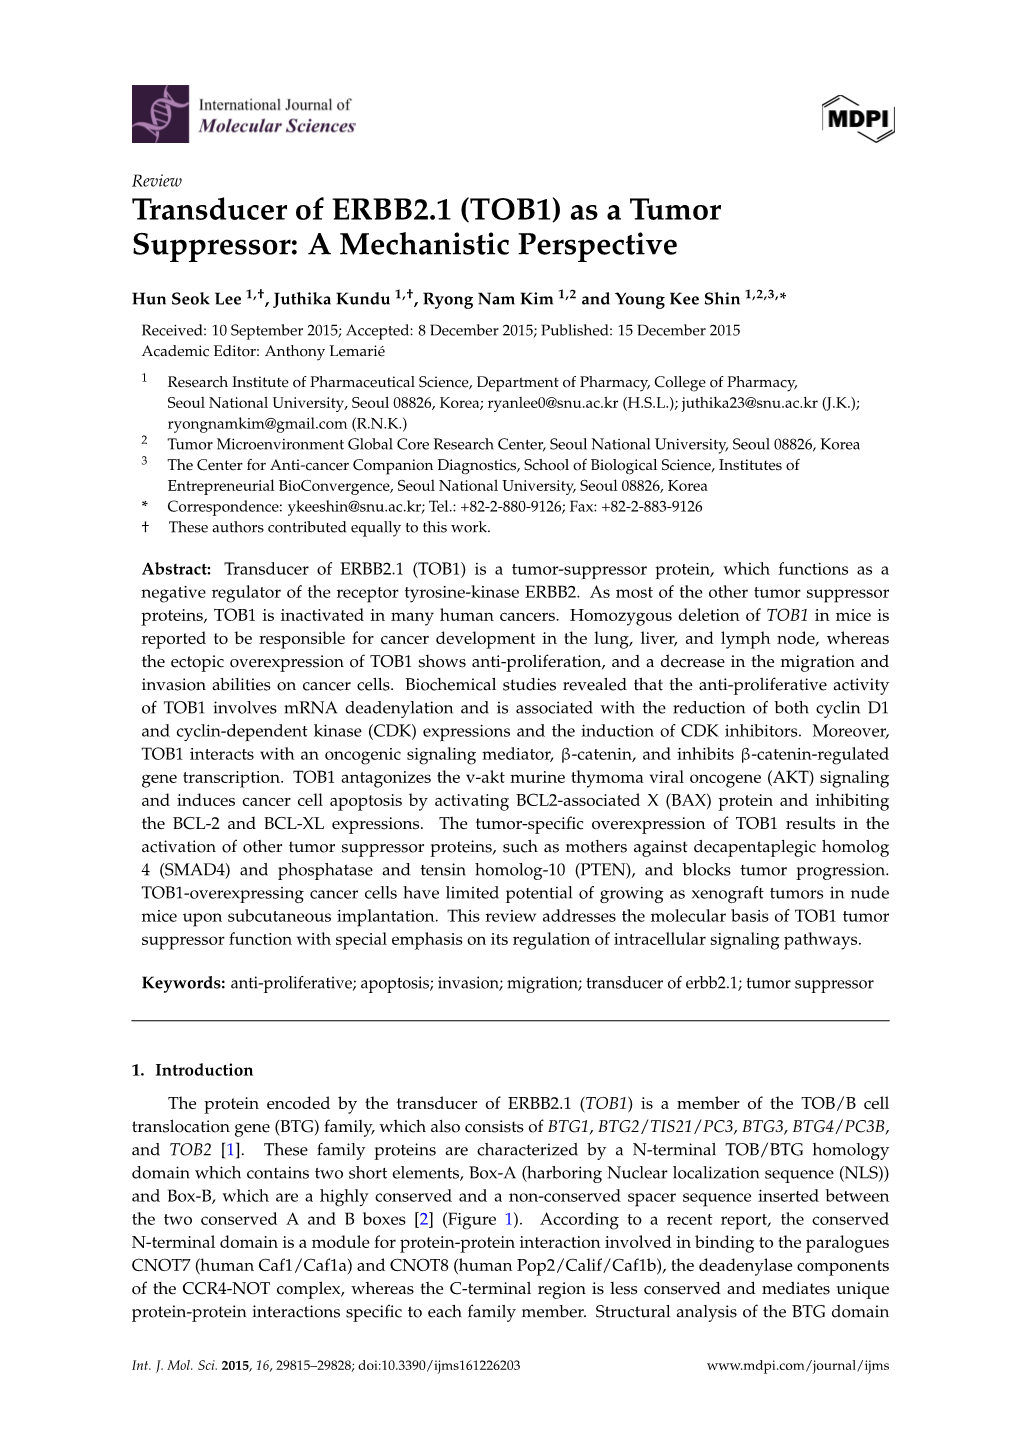 As a Tumor Suppressor: a Mechanistic Perspective